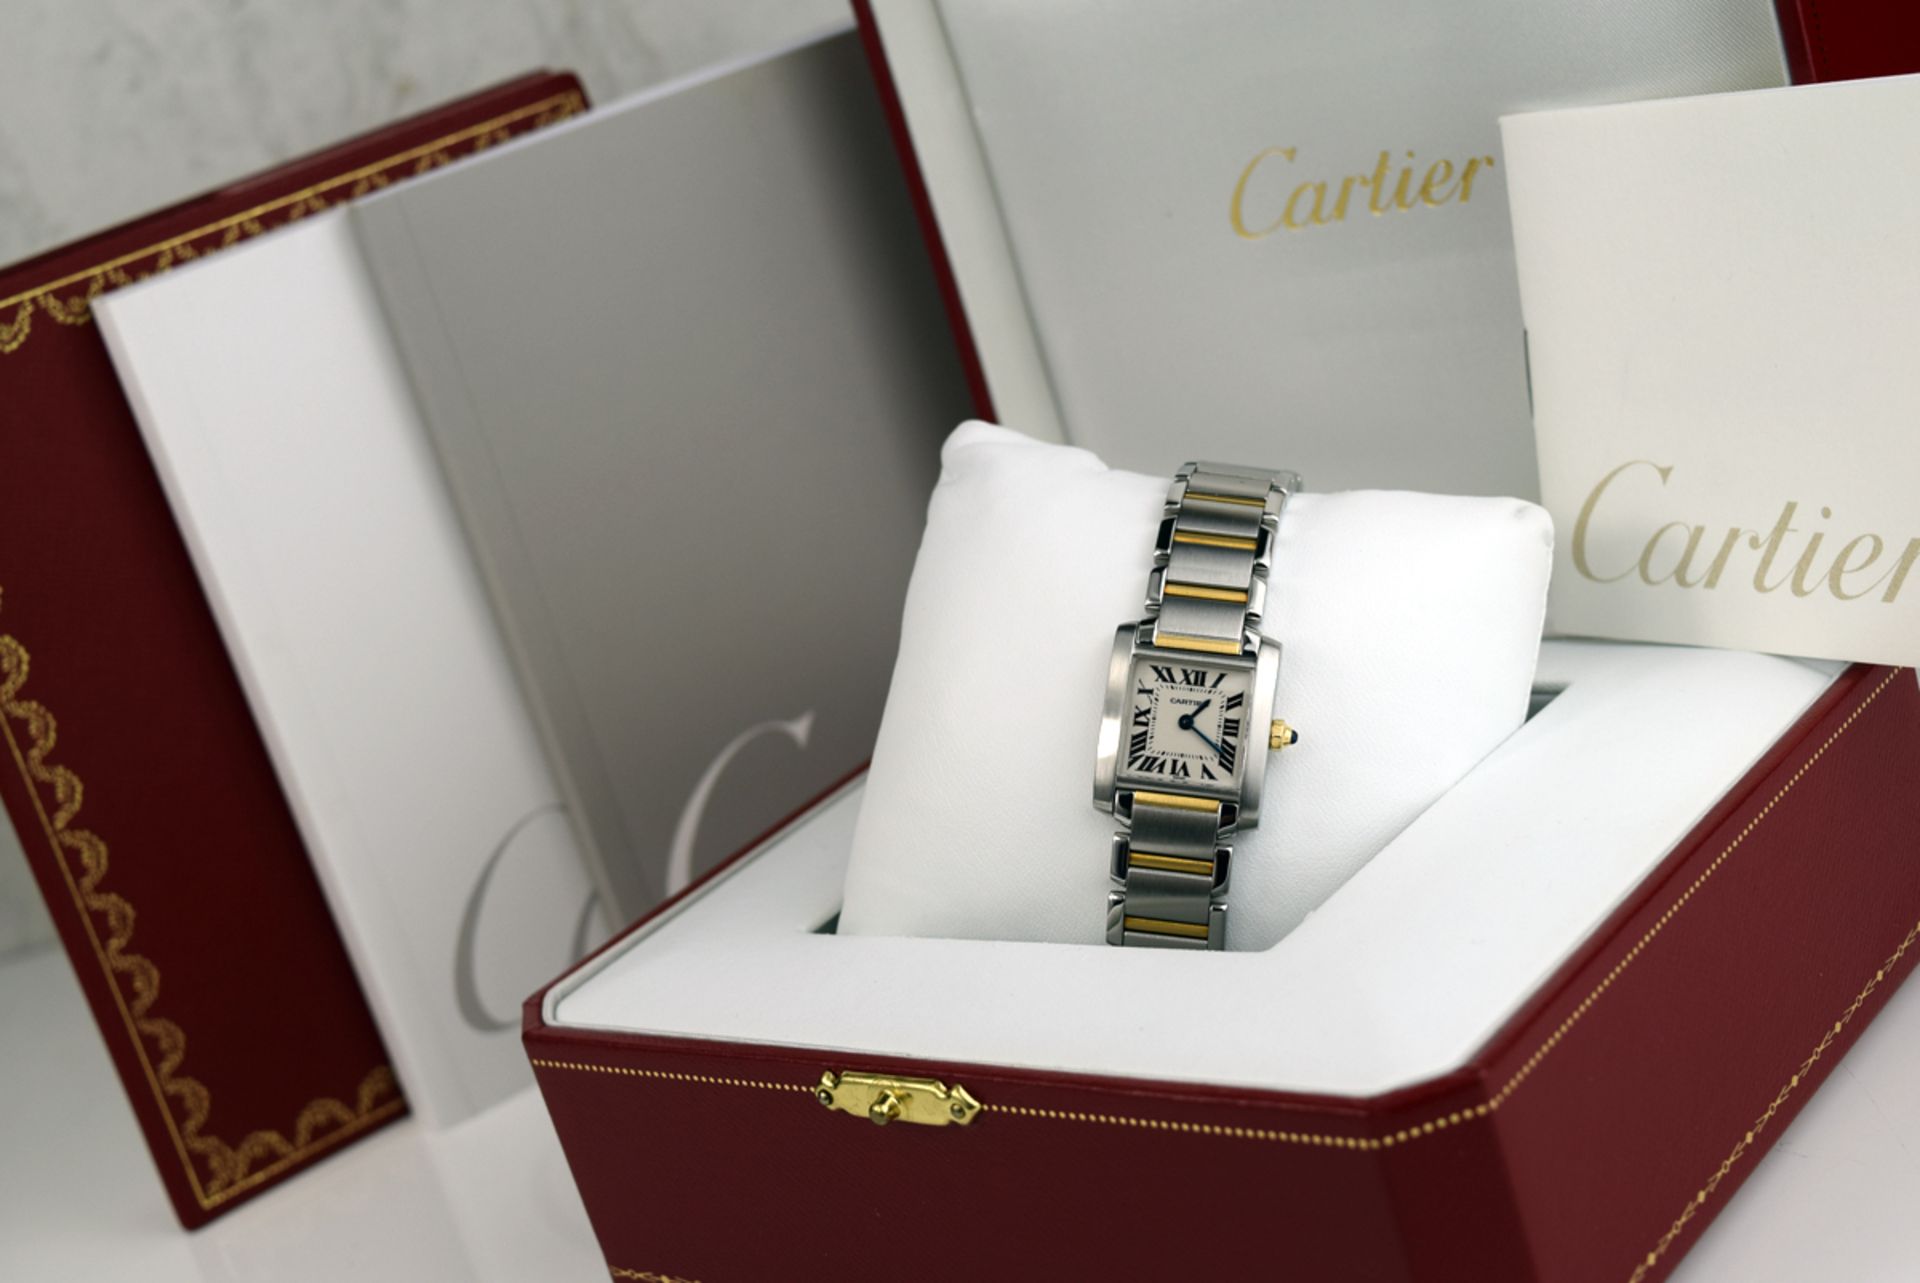 CARTIER TANK FRANCAISE - 18K GOLD & STEEL - W51007Q4 / 2300 - Image 3 of 12